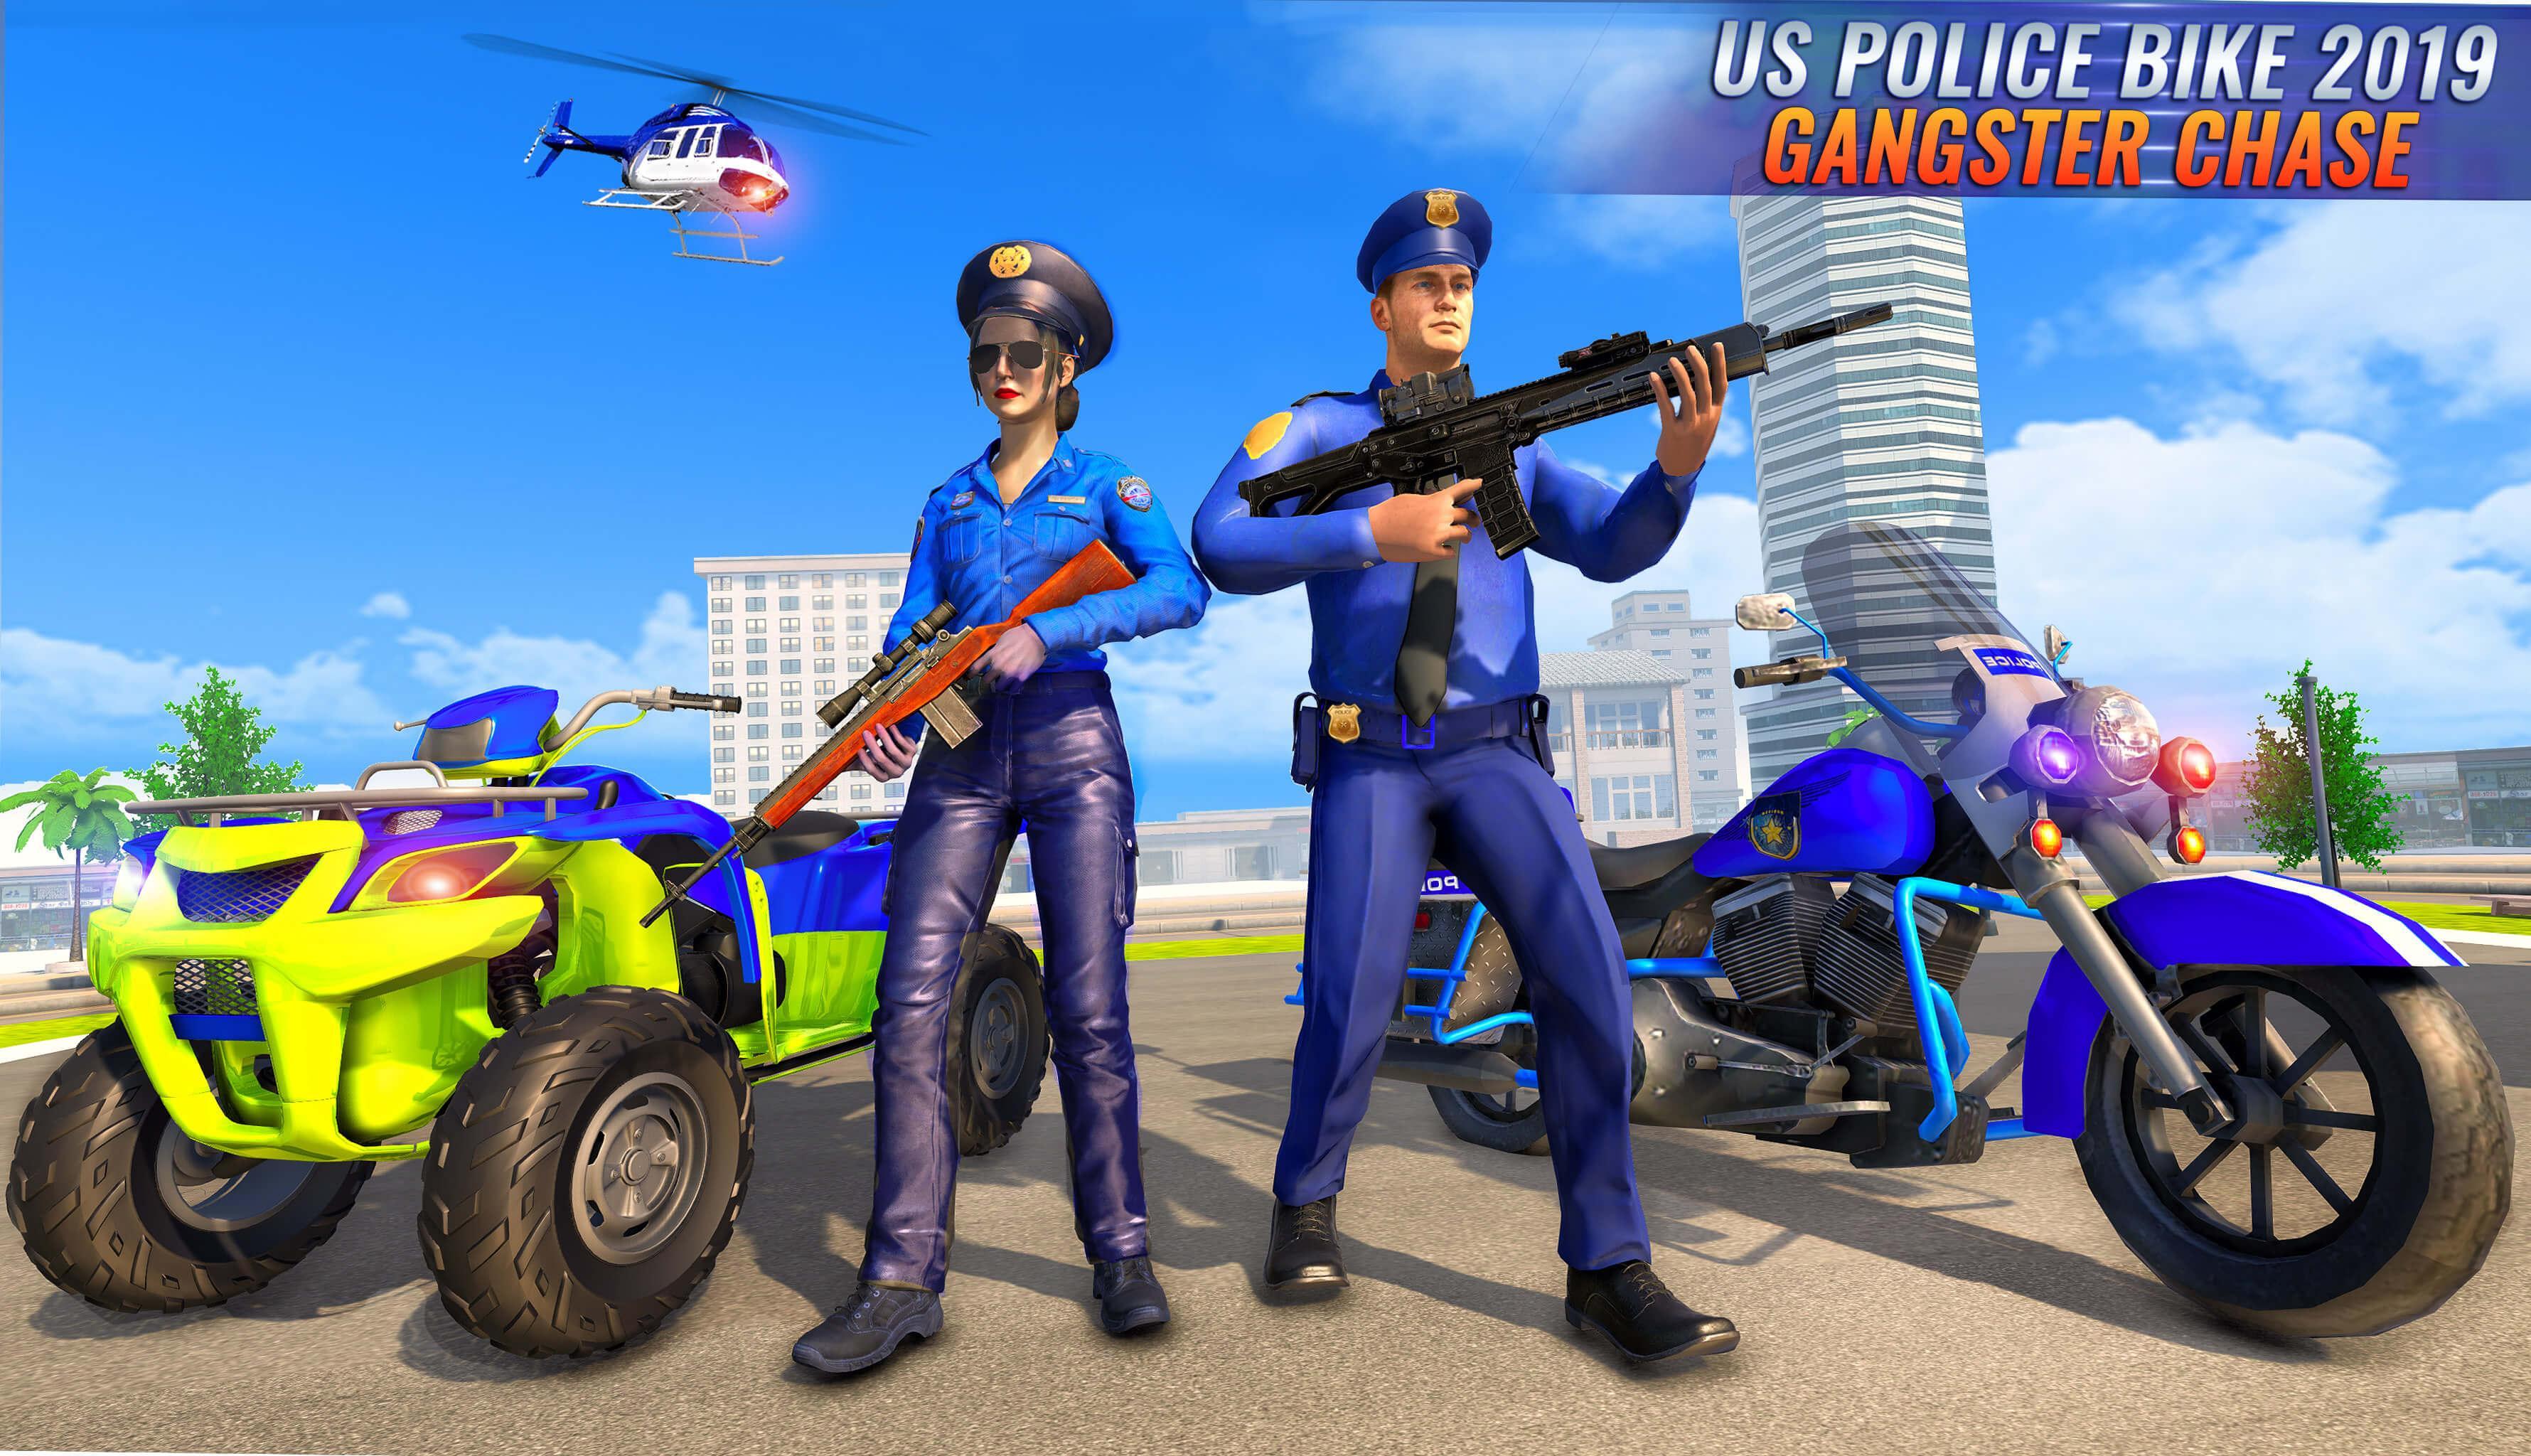 Us Police Bike 2020 Gangster Chase Simulator For Android Apk Download - mafia vs police in roblox roblox jailbreak roblox games